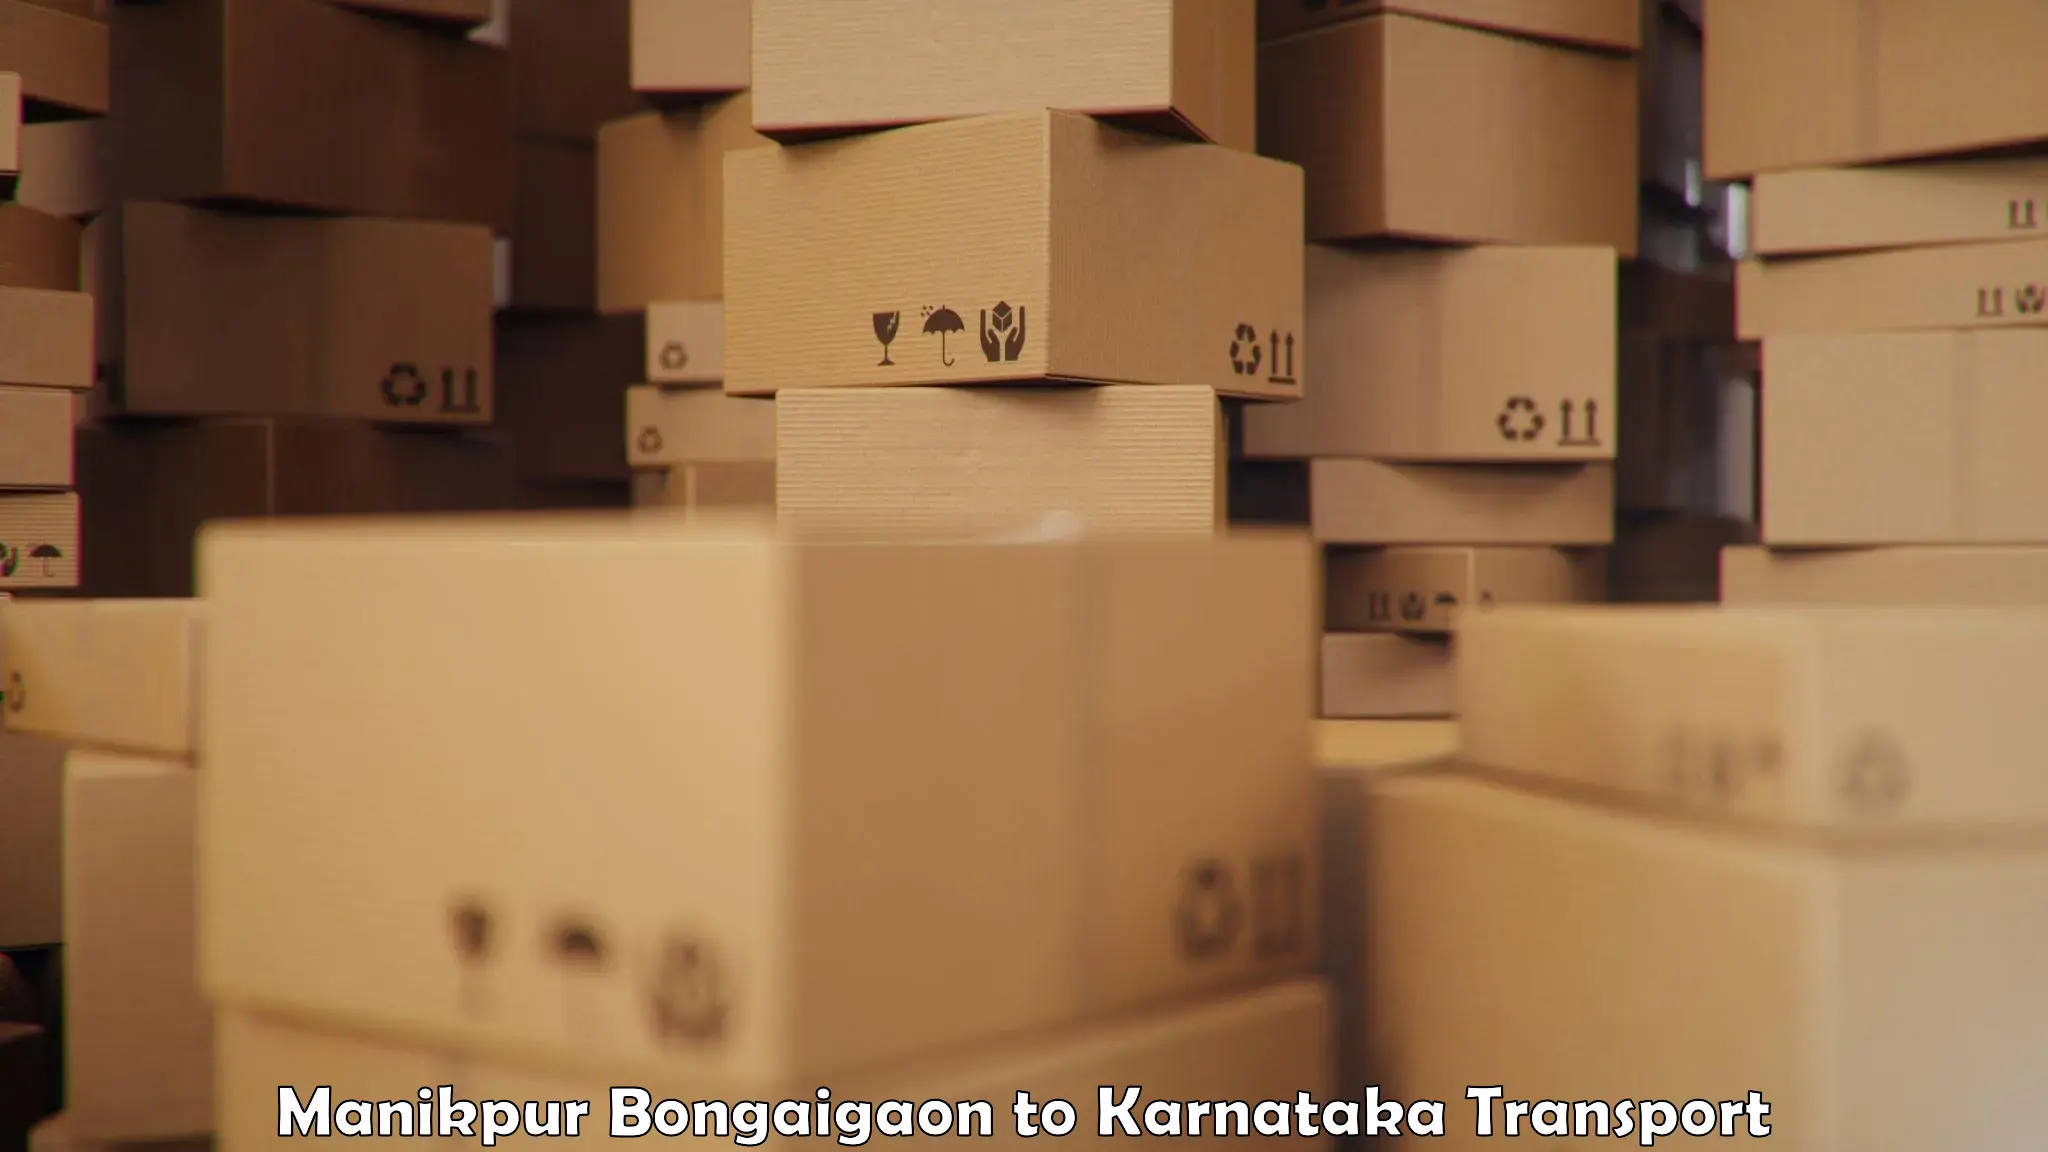 Domestic goods transportation services in Manikpur Bongaigaon to Athani